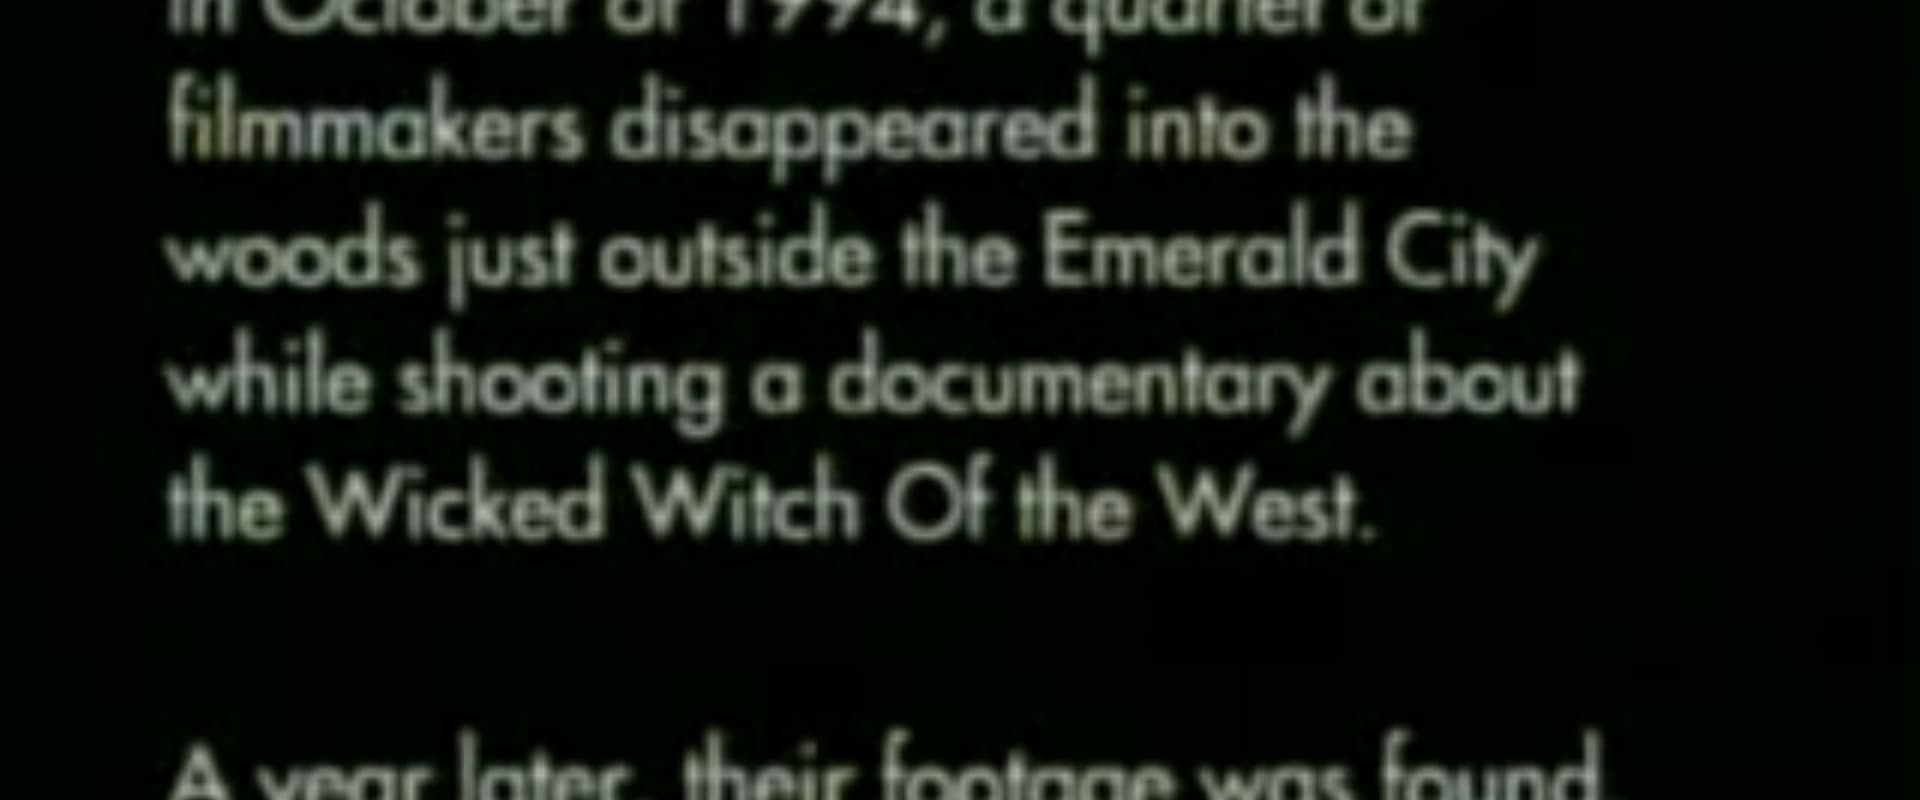 The Wicked Witch Project